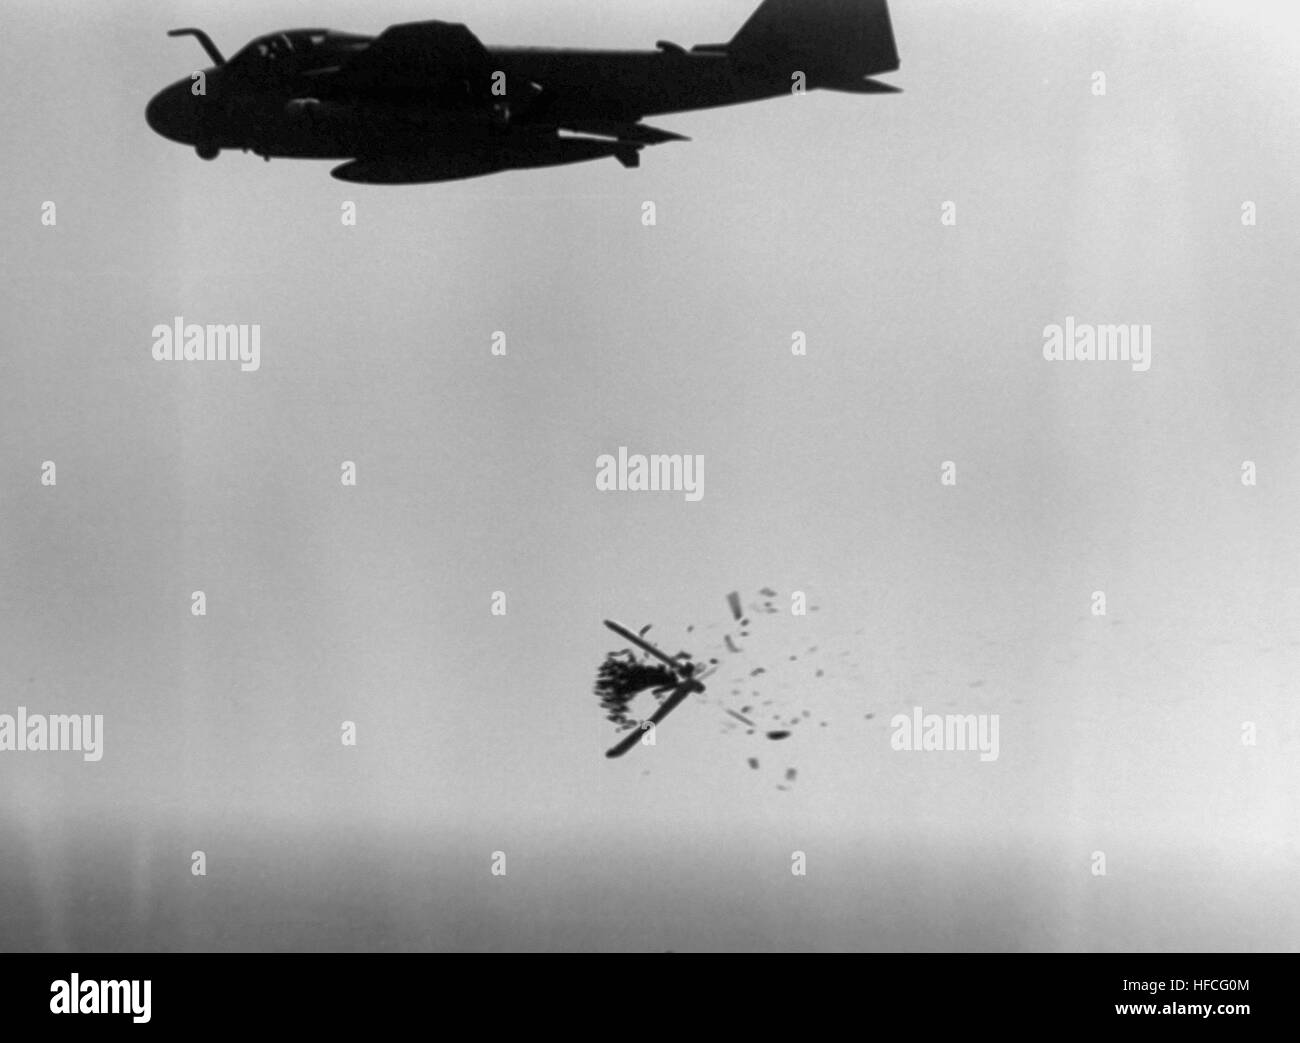 880418-N-ZZ999-006 PERSIAN GULF (April 18, 1988) A CBU-59 cluster munition splits open to release its bomblets after being dropped from an A-6E Intruder aircraft during an attack on an Iranian target. The attack was part of Operation Praying Mantis, which was launched after the guided-missile frigate USS Samuel B. Roberts (FFG-58) struck an Iranian mine on April 14, 1988. (U.S. Navy photo/Released) A-6E of VA-85 drops CBU-59 cluster bomb on Iranian target 1988 Stock Photo